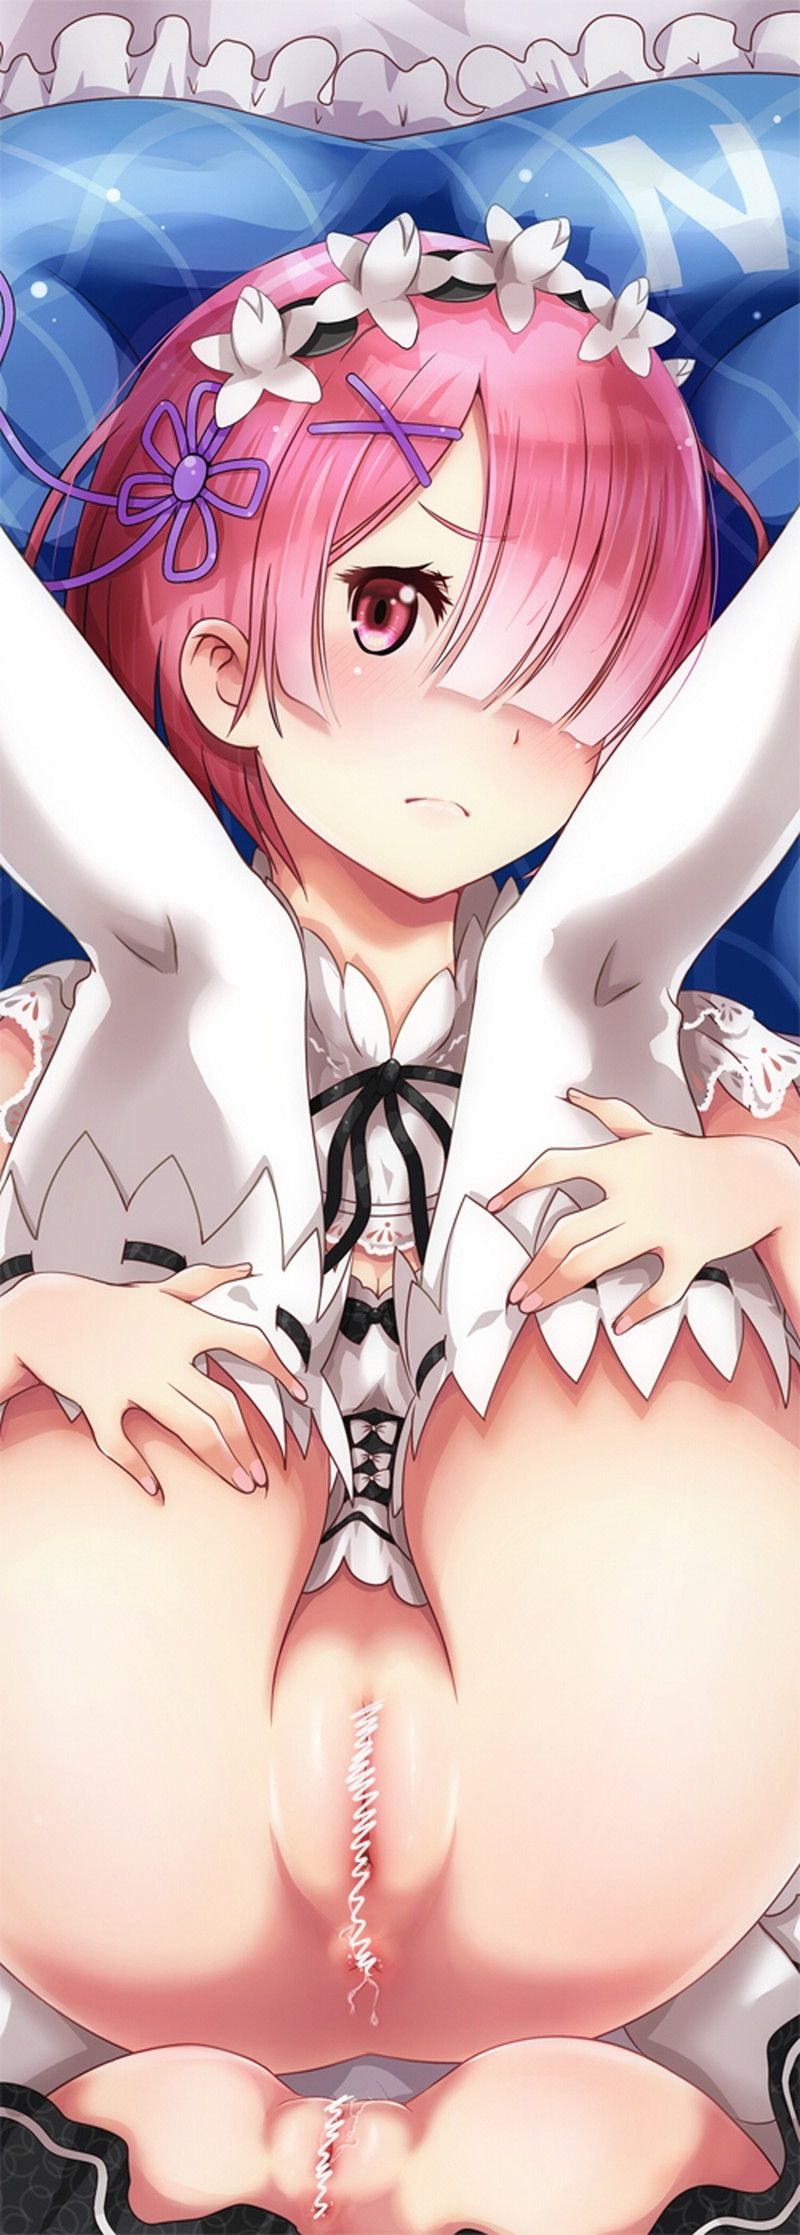 [re-zero] Eroticism image www of lamb and the rem that are more popular than the Emi rear 32